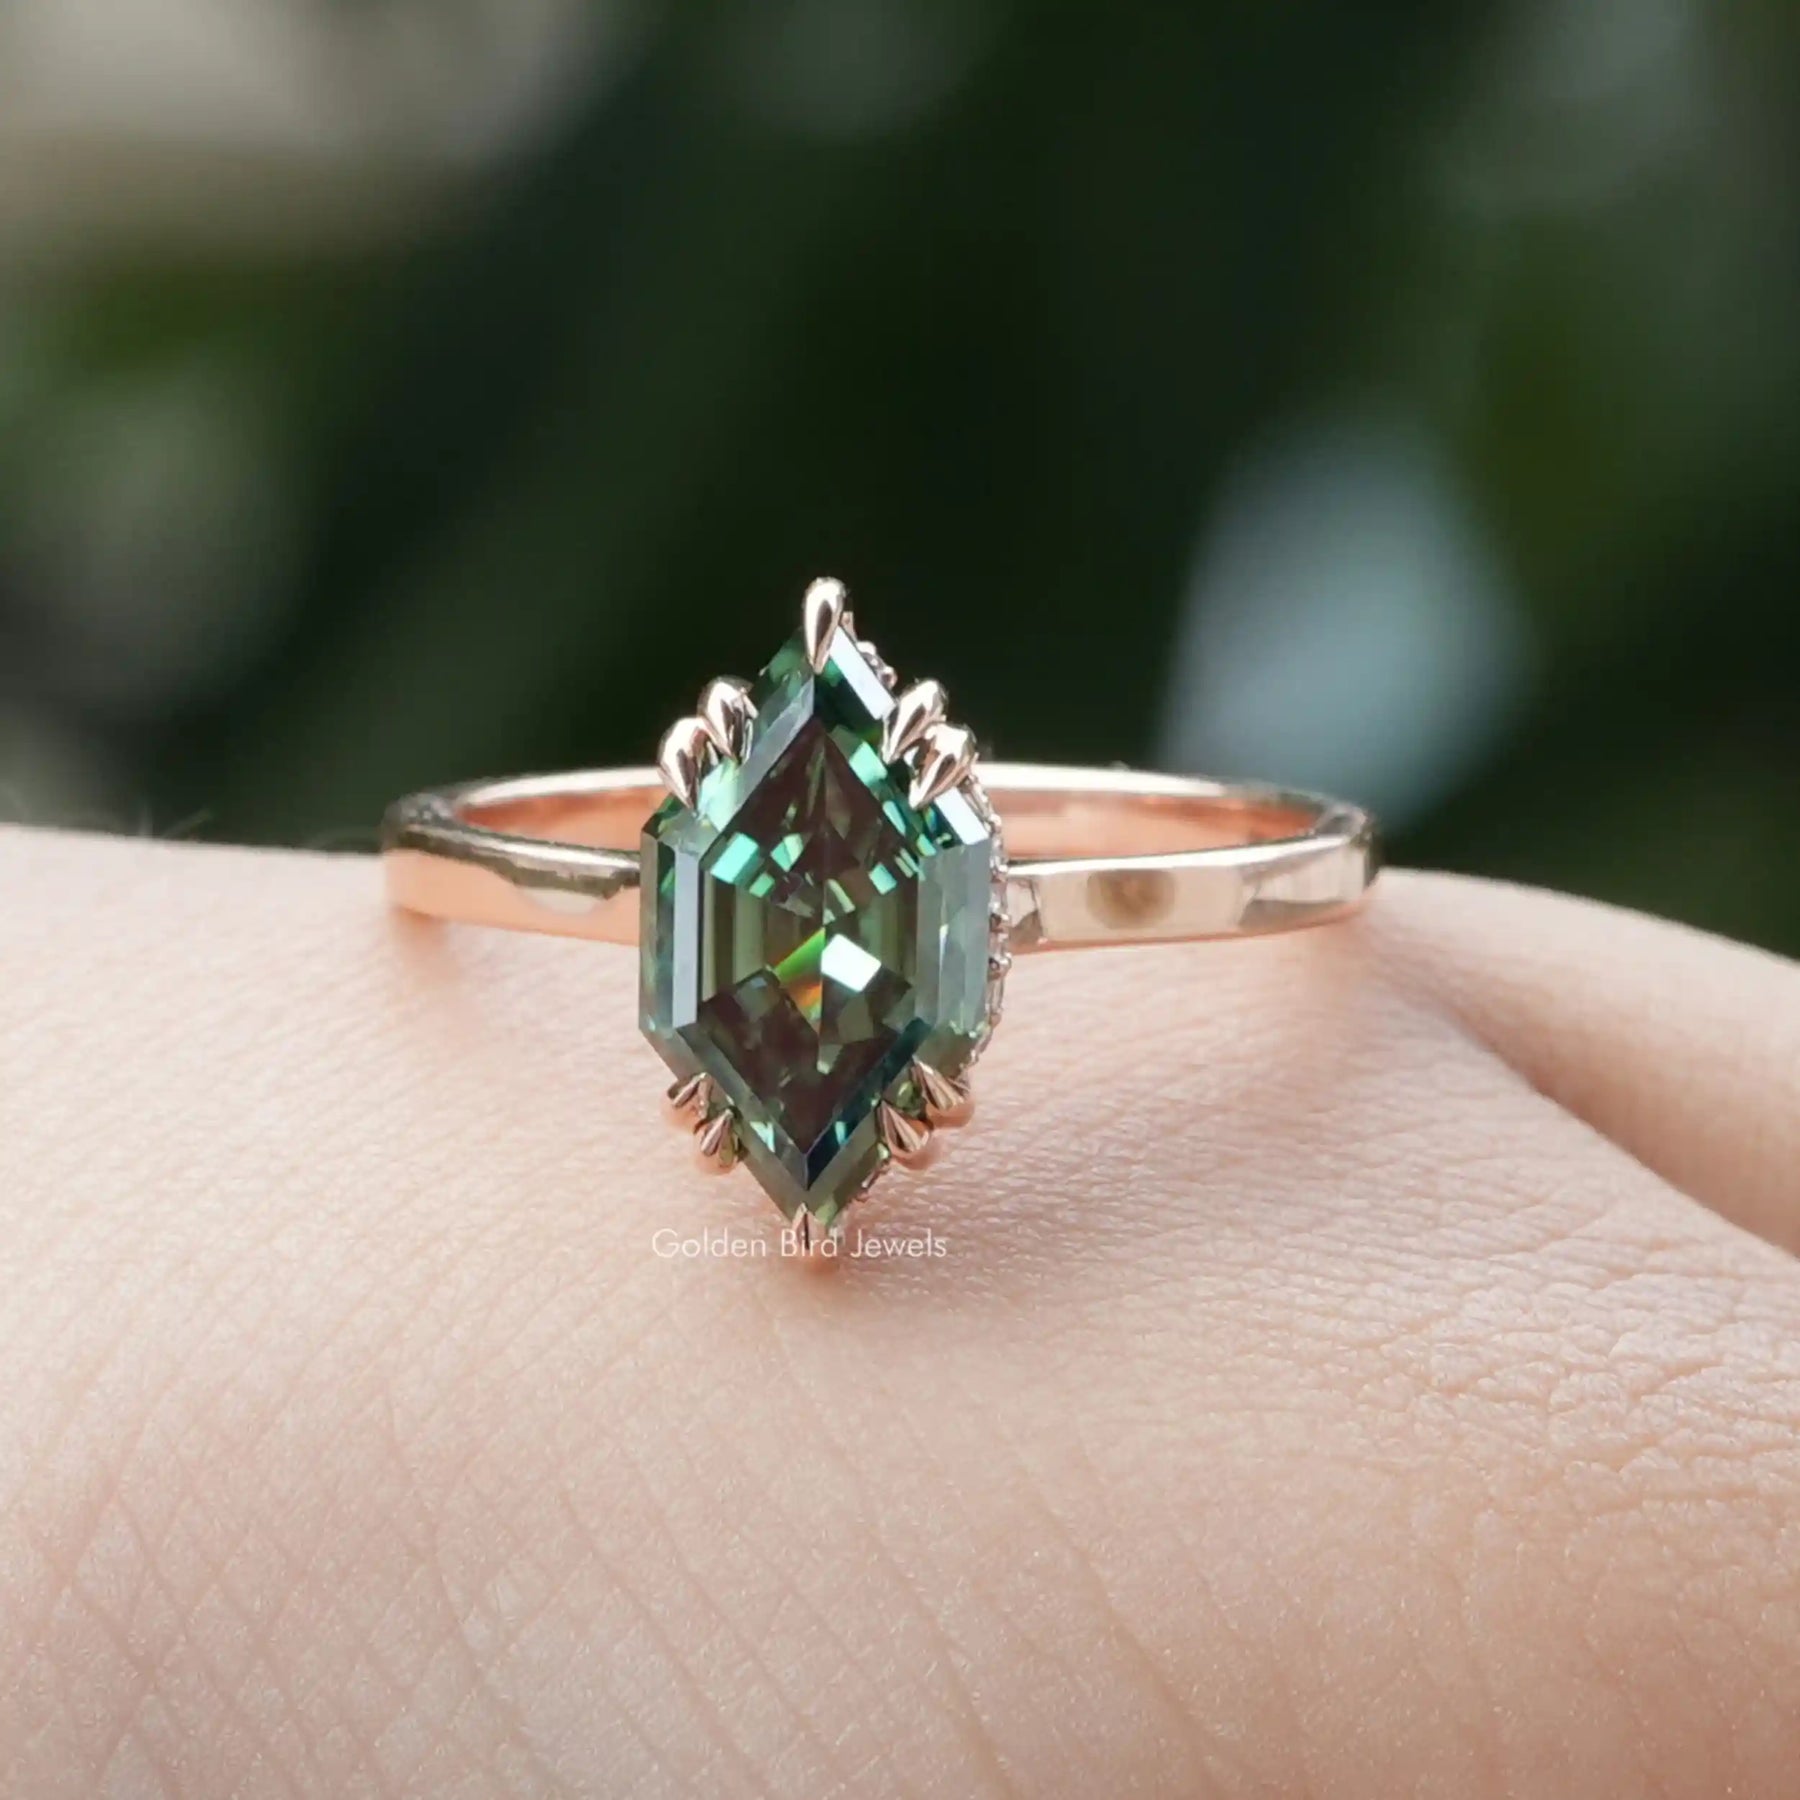 [Double Prong set Green Marquise Cut Solitaire Engagement Ring]-[Golden Bird Jewels]